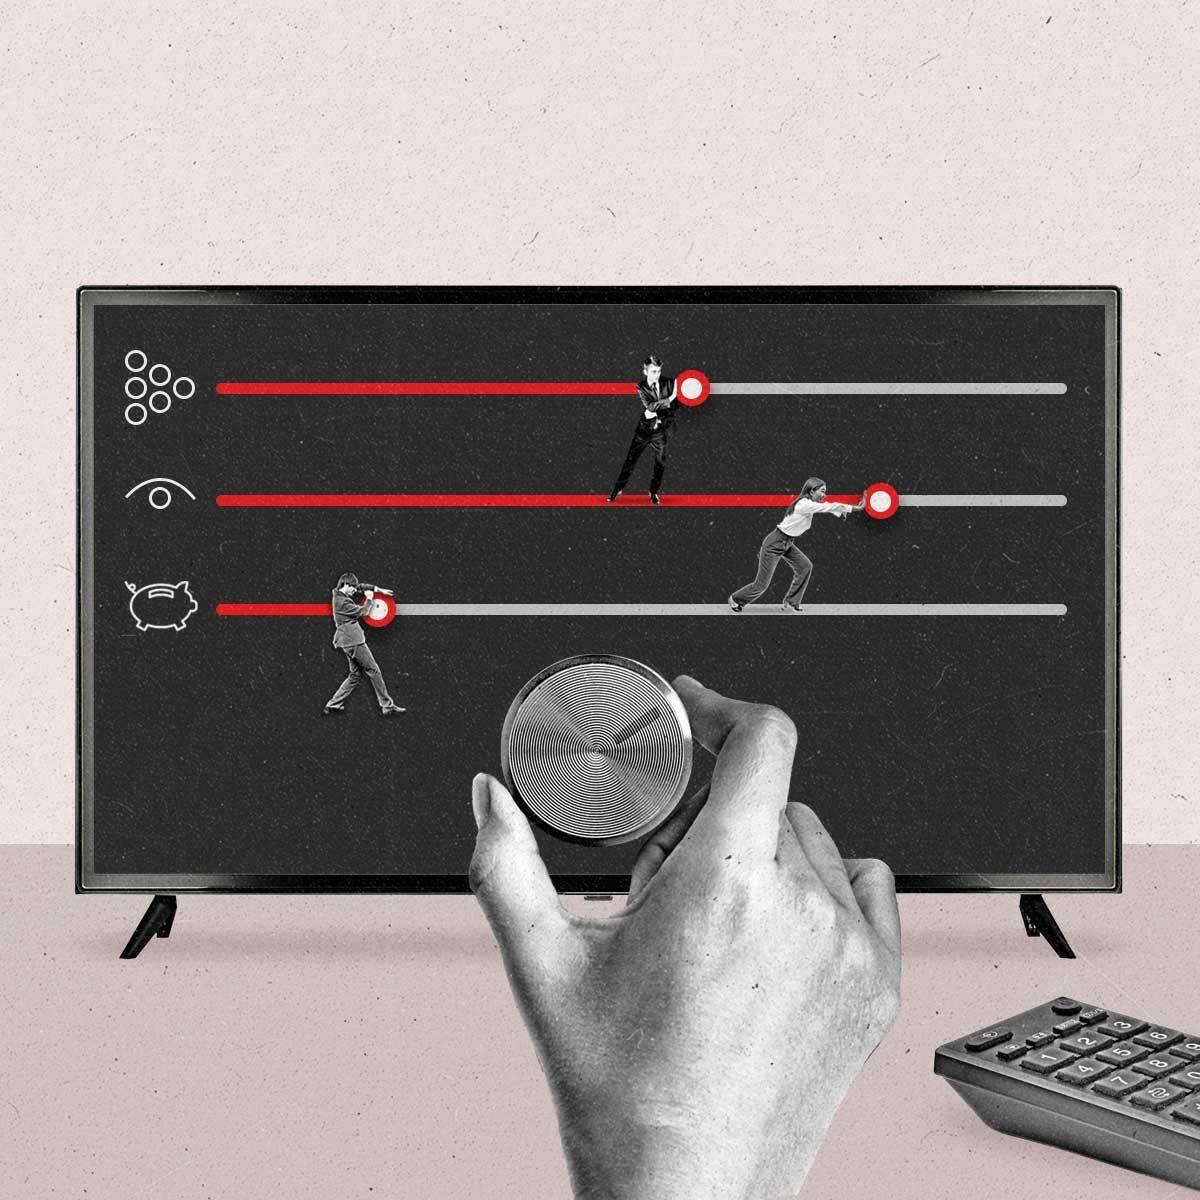 A hand turns a dial on a TV screen while progress bars aligned with various ad-buying metrics are pushed and pulled back and forth by businesspeople.